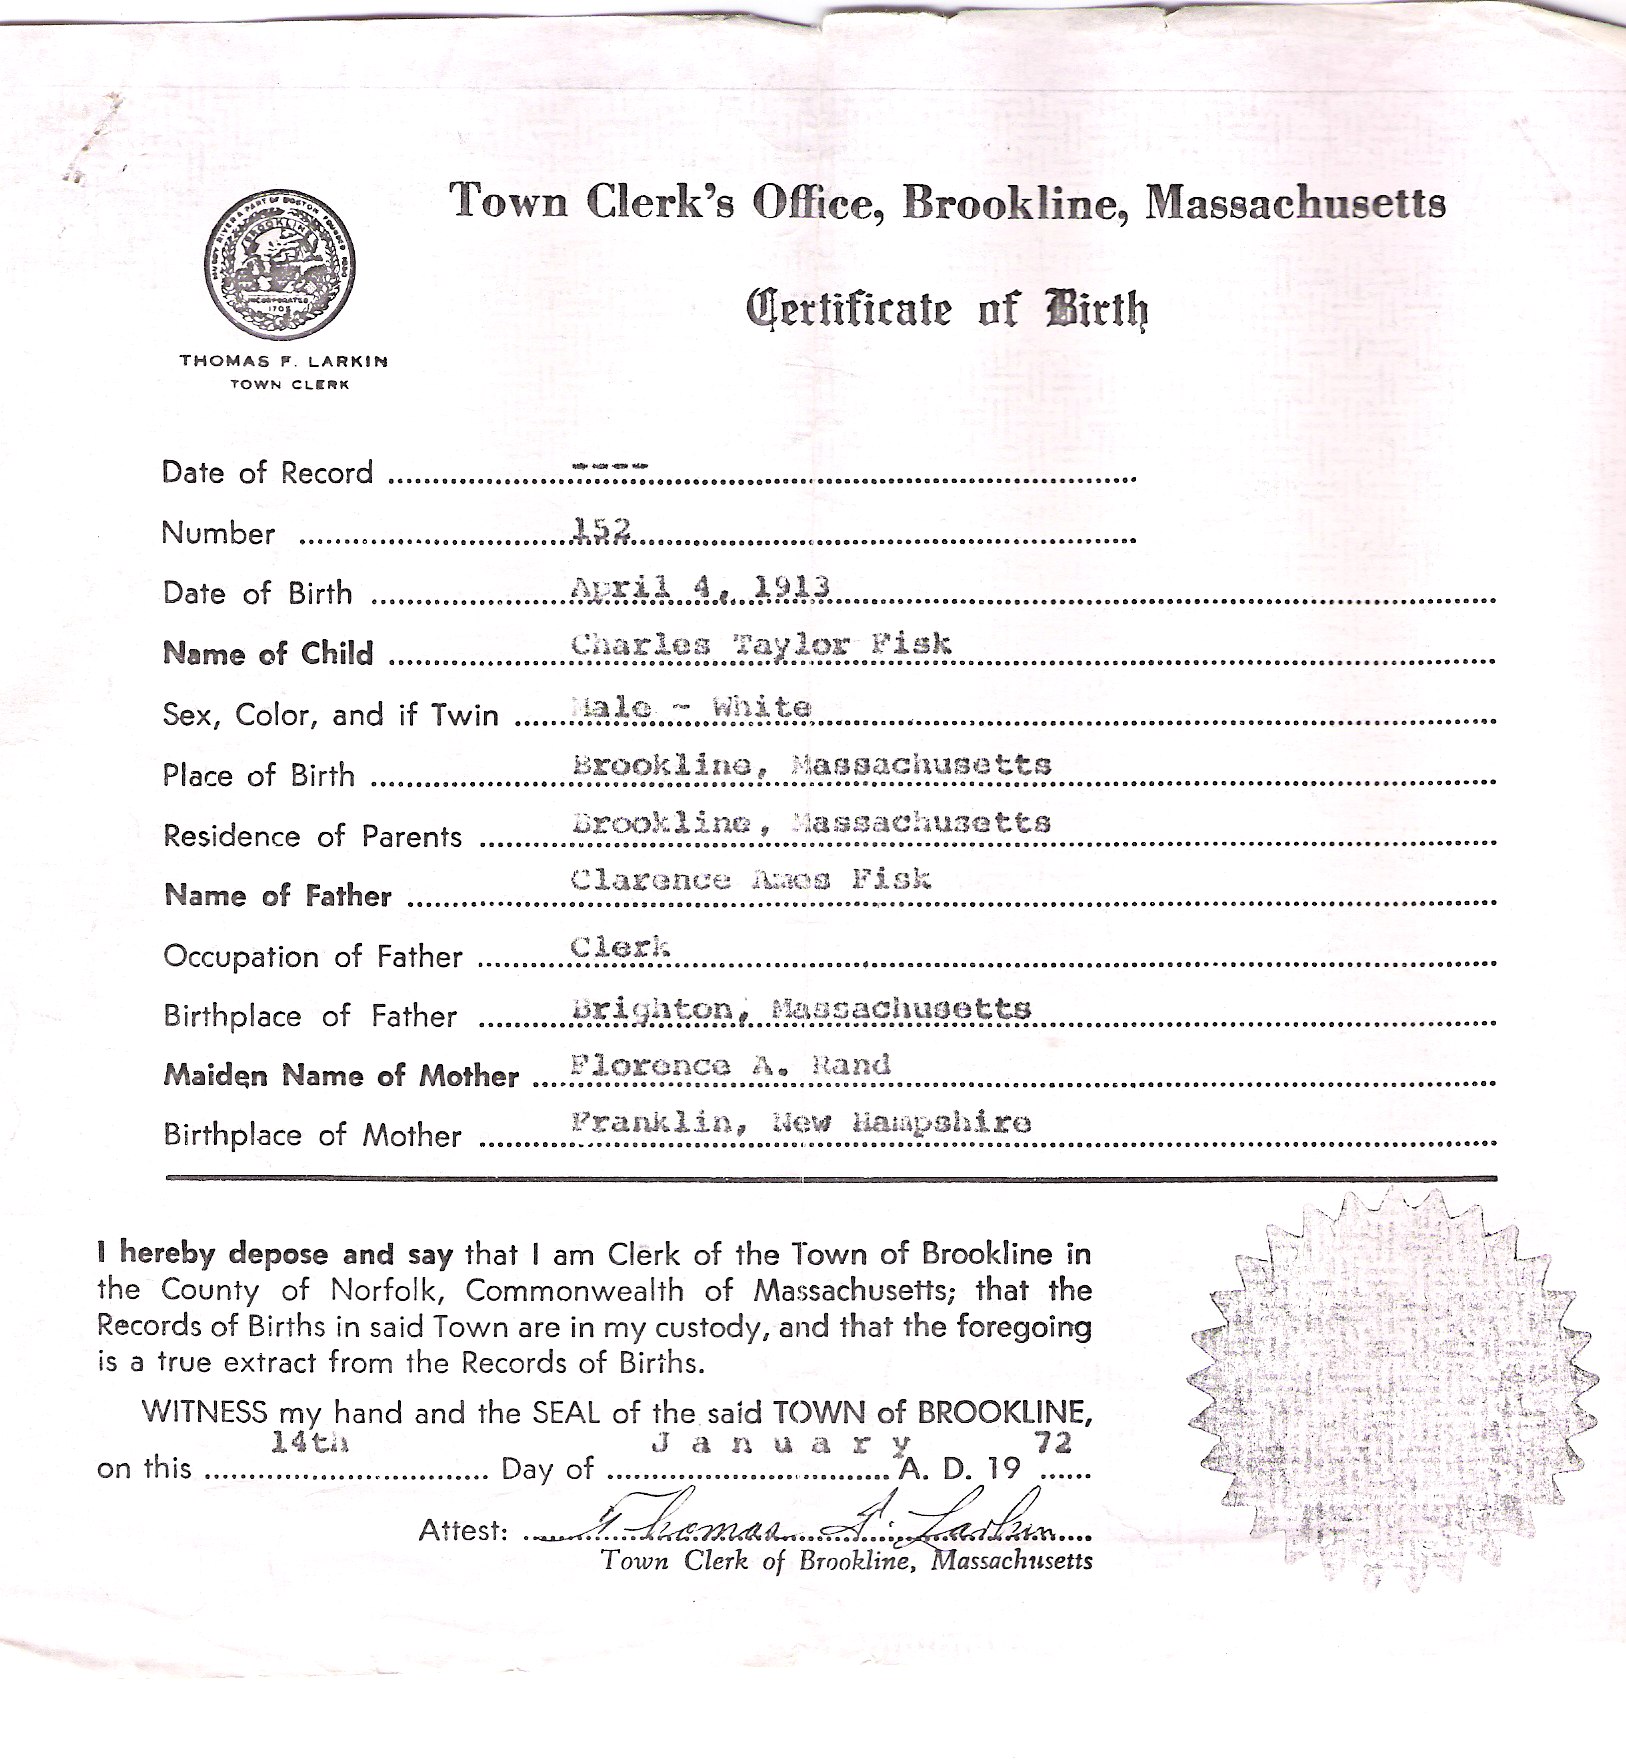 {}{Charles Taylor\'s Birth Certificate 1913};{@Date:1972};{@Place:Brookline};{ MA};{@Author:Clarence Fisk ll Modified: May 20};{2021};{*NOP*};{Charles  Taylor Fisk Rand};{eTg};{[ATHR]Clarence Fisk ll  Modified: May 20,2021